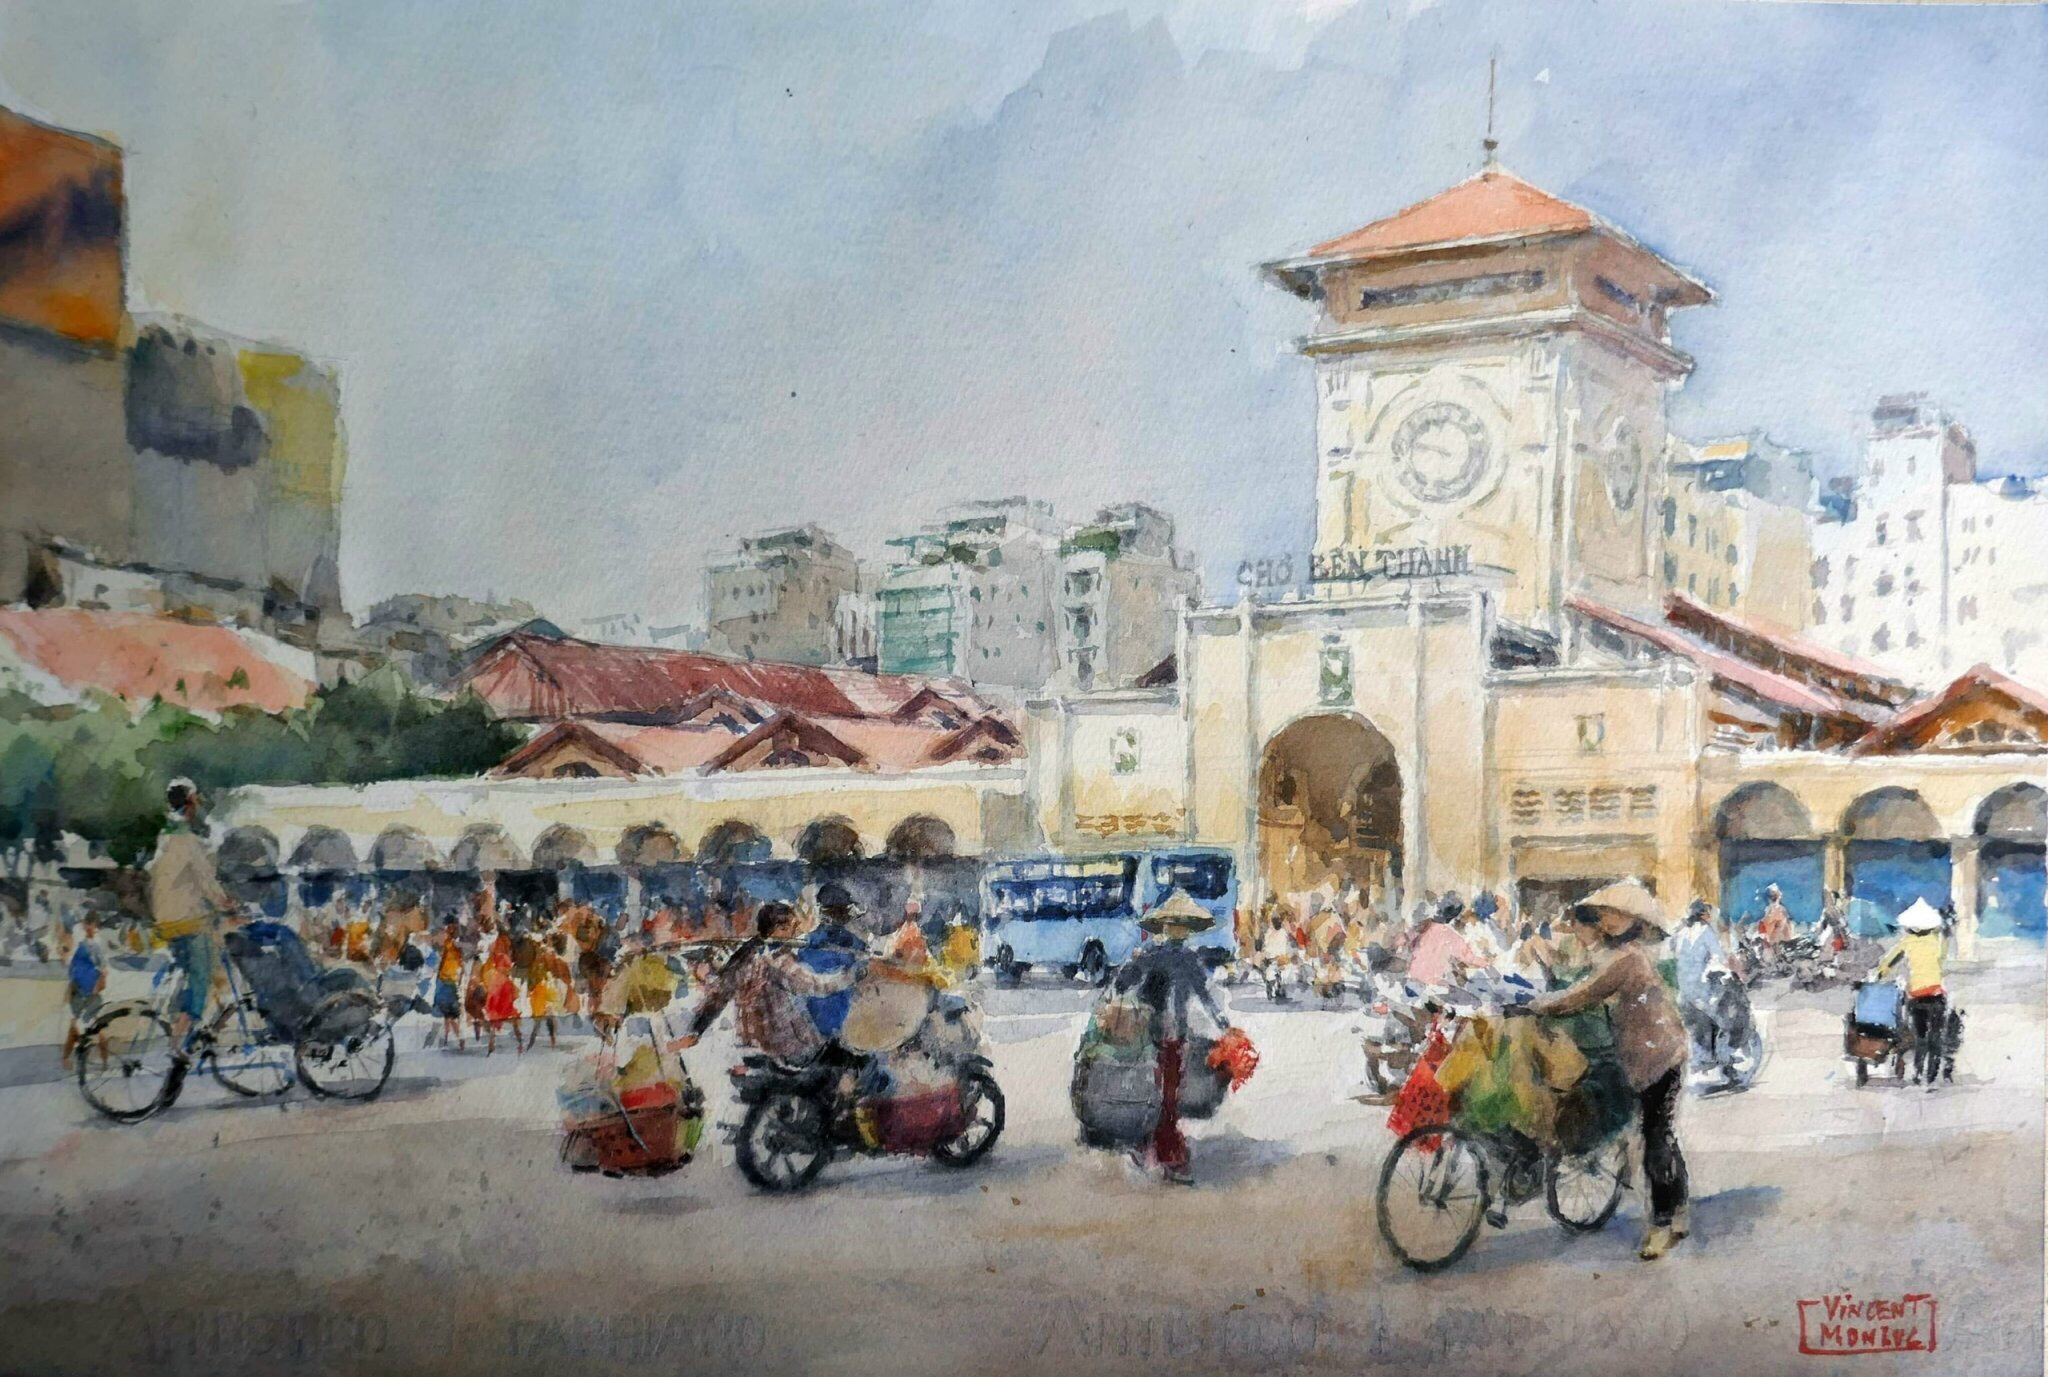 Sketches of Ho Chi Minh City’s popular locations on display